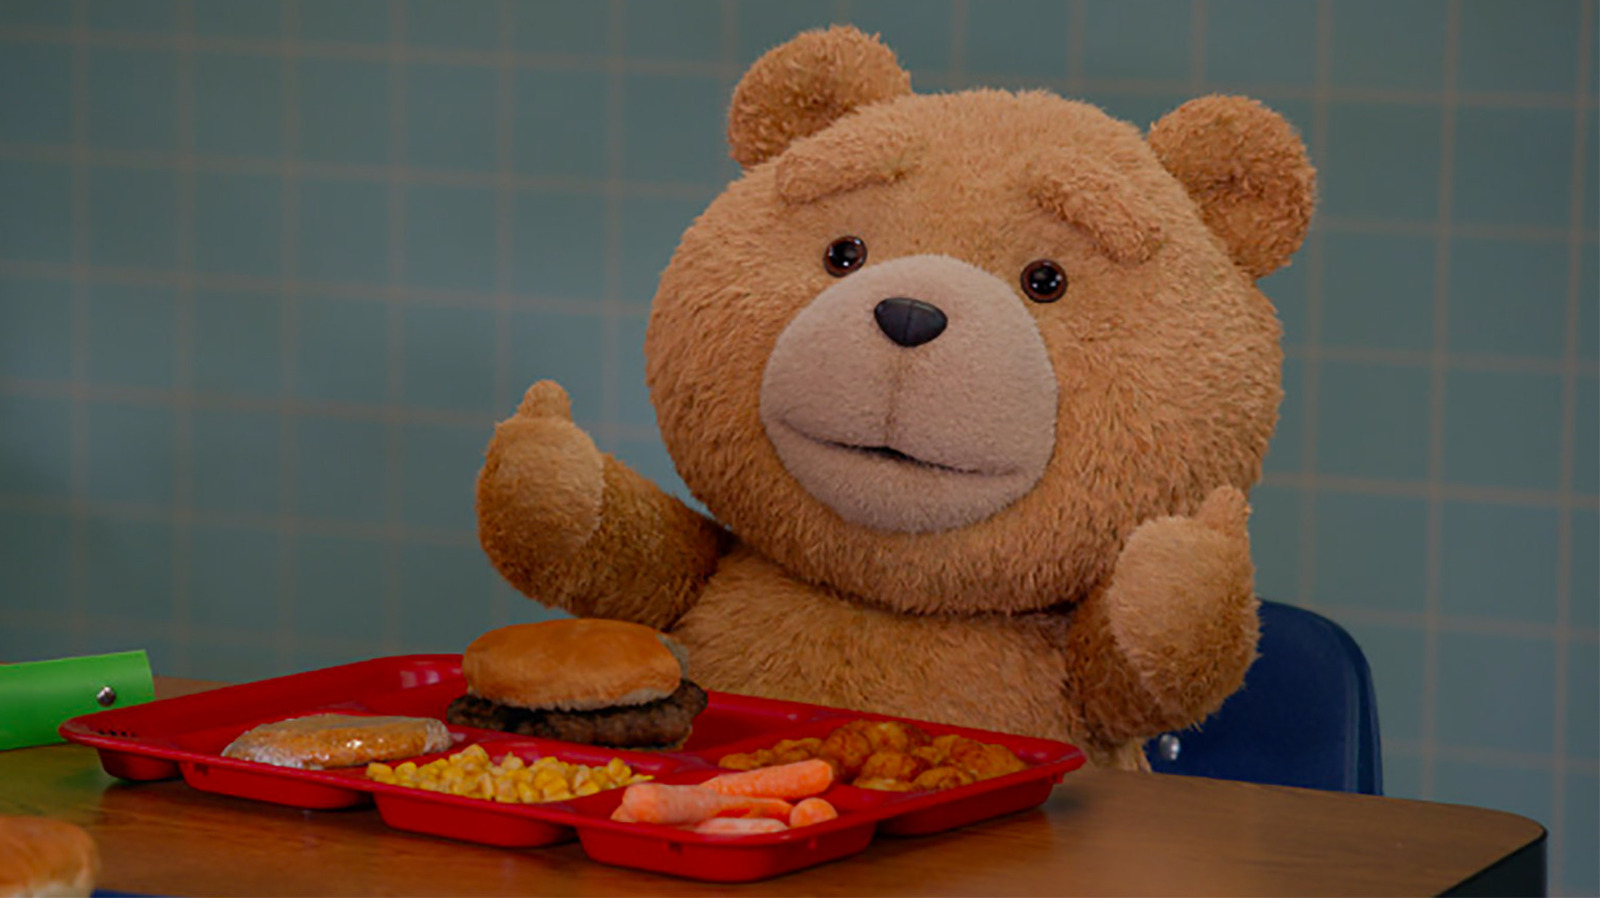 Peacock's Ted TV Series Trailer Sends Seth MacFarlane's Foul-Mouthed Teddy Bear To School